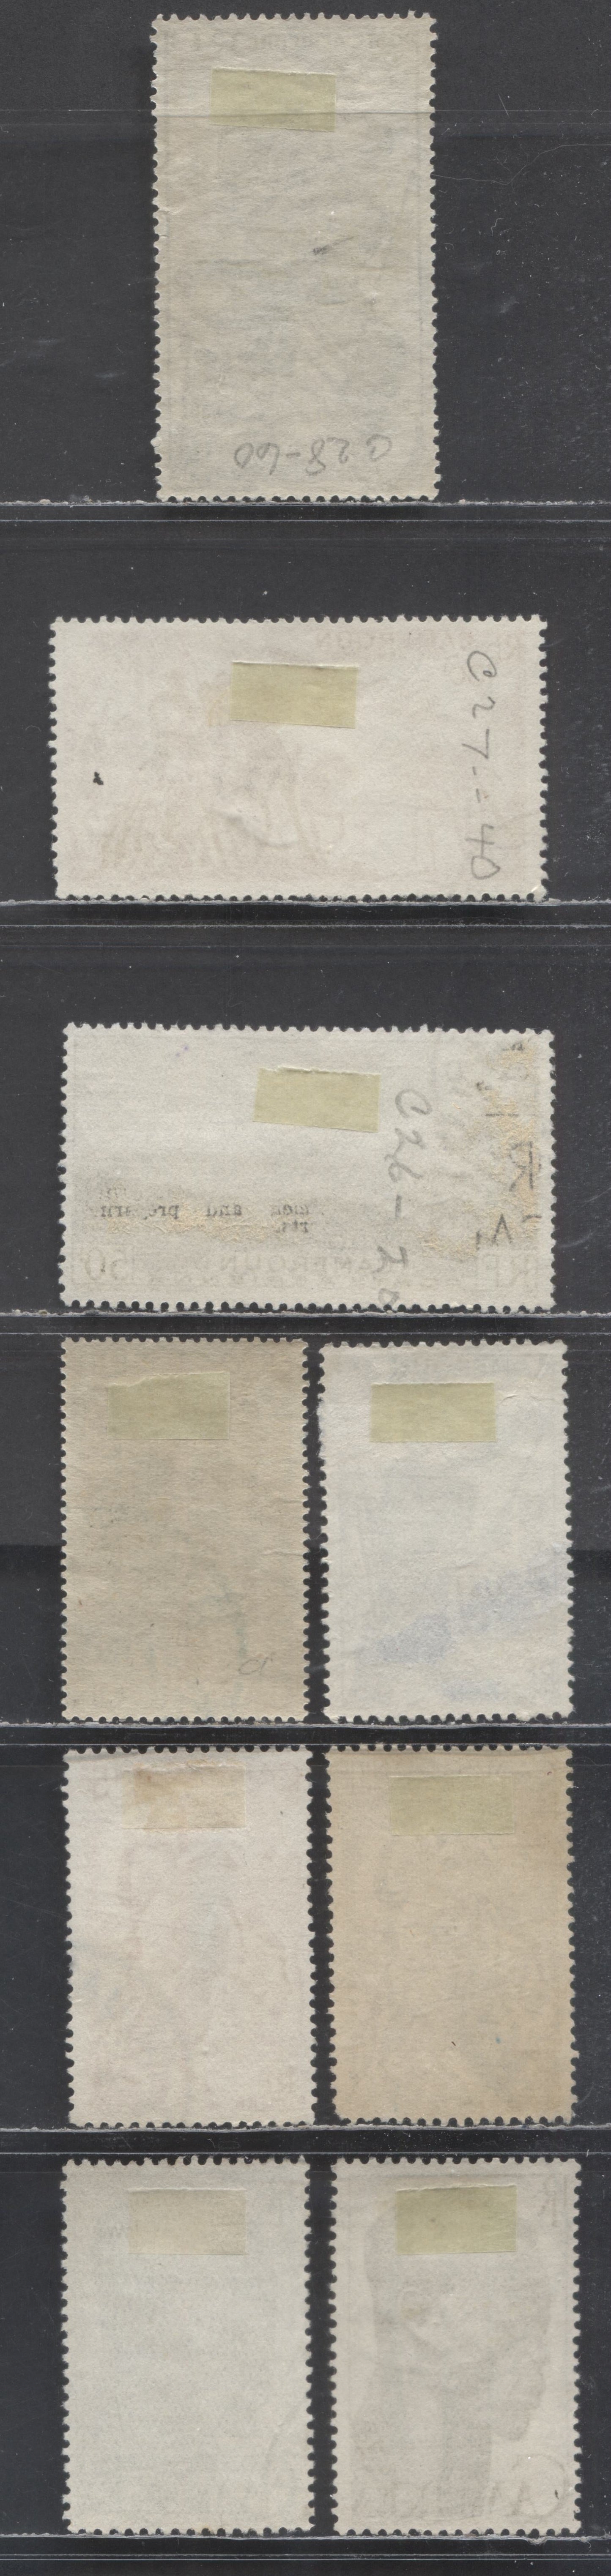 Lot 94 Cameroun SC#294/C28 1941-1947 Pictorial Definitives - Airmails, 9 Very Fine Used Singles, Click on Listing to See ALL Pictures, 2017 Scott Cat. $9.55